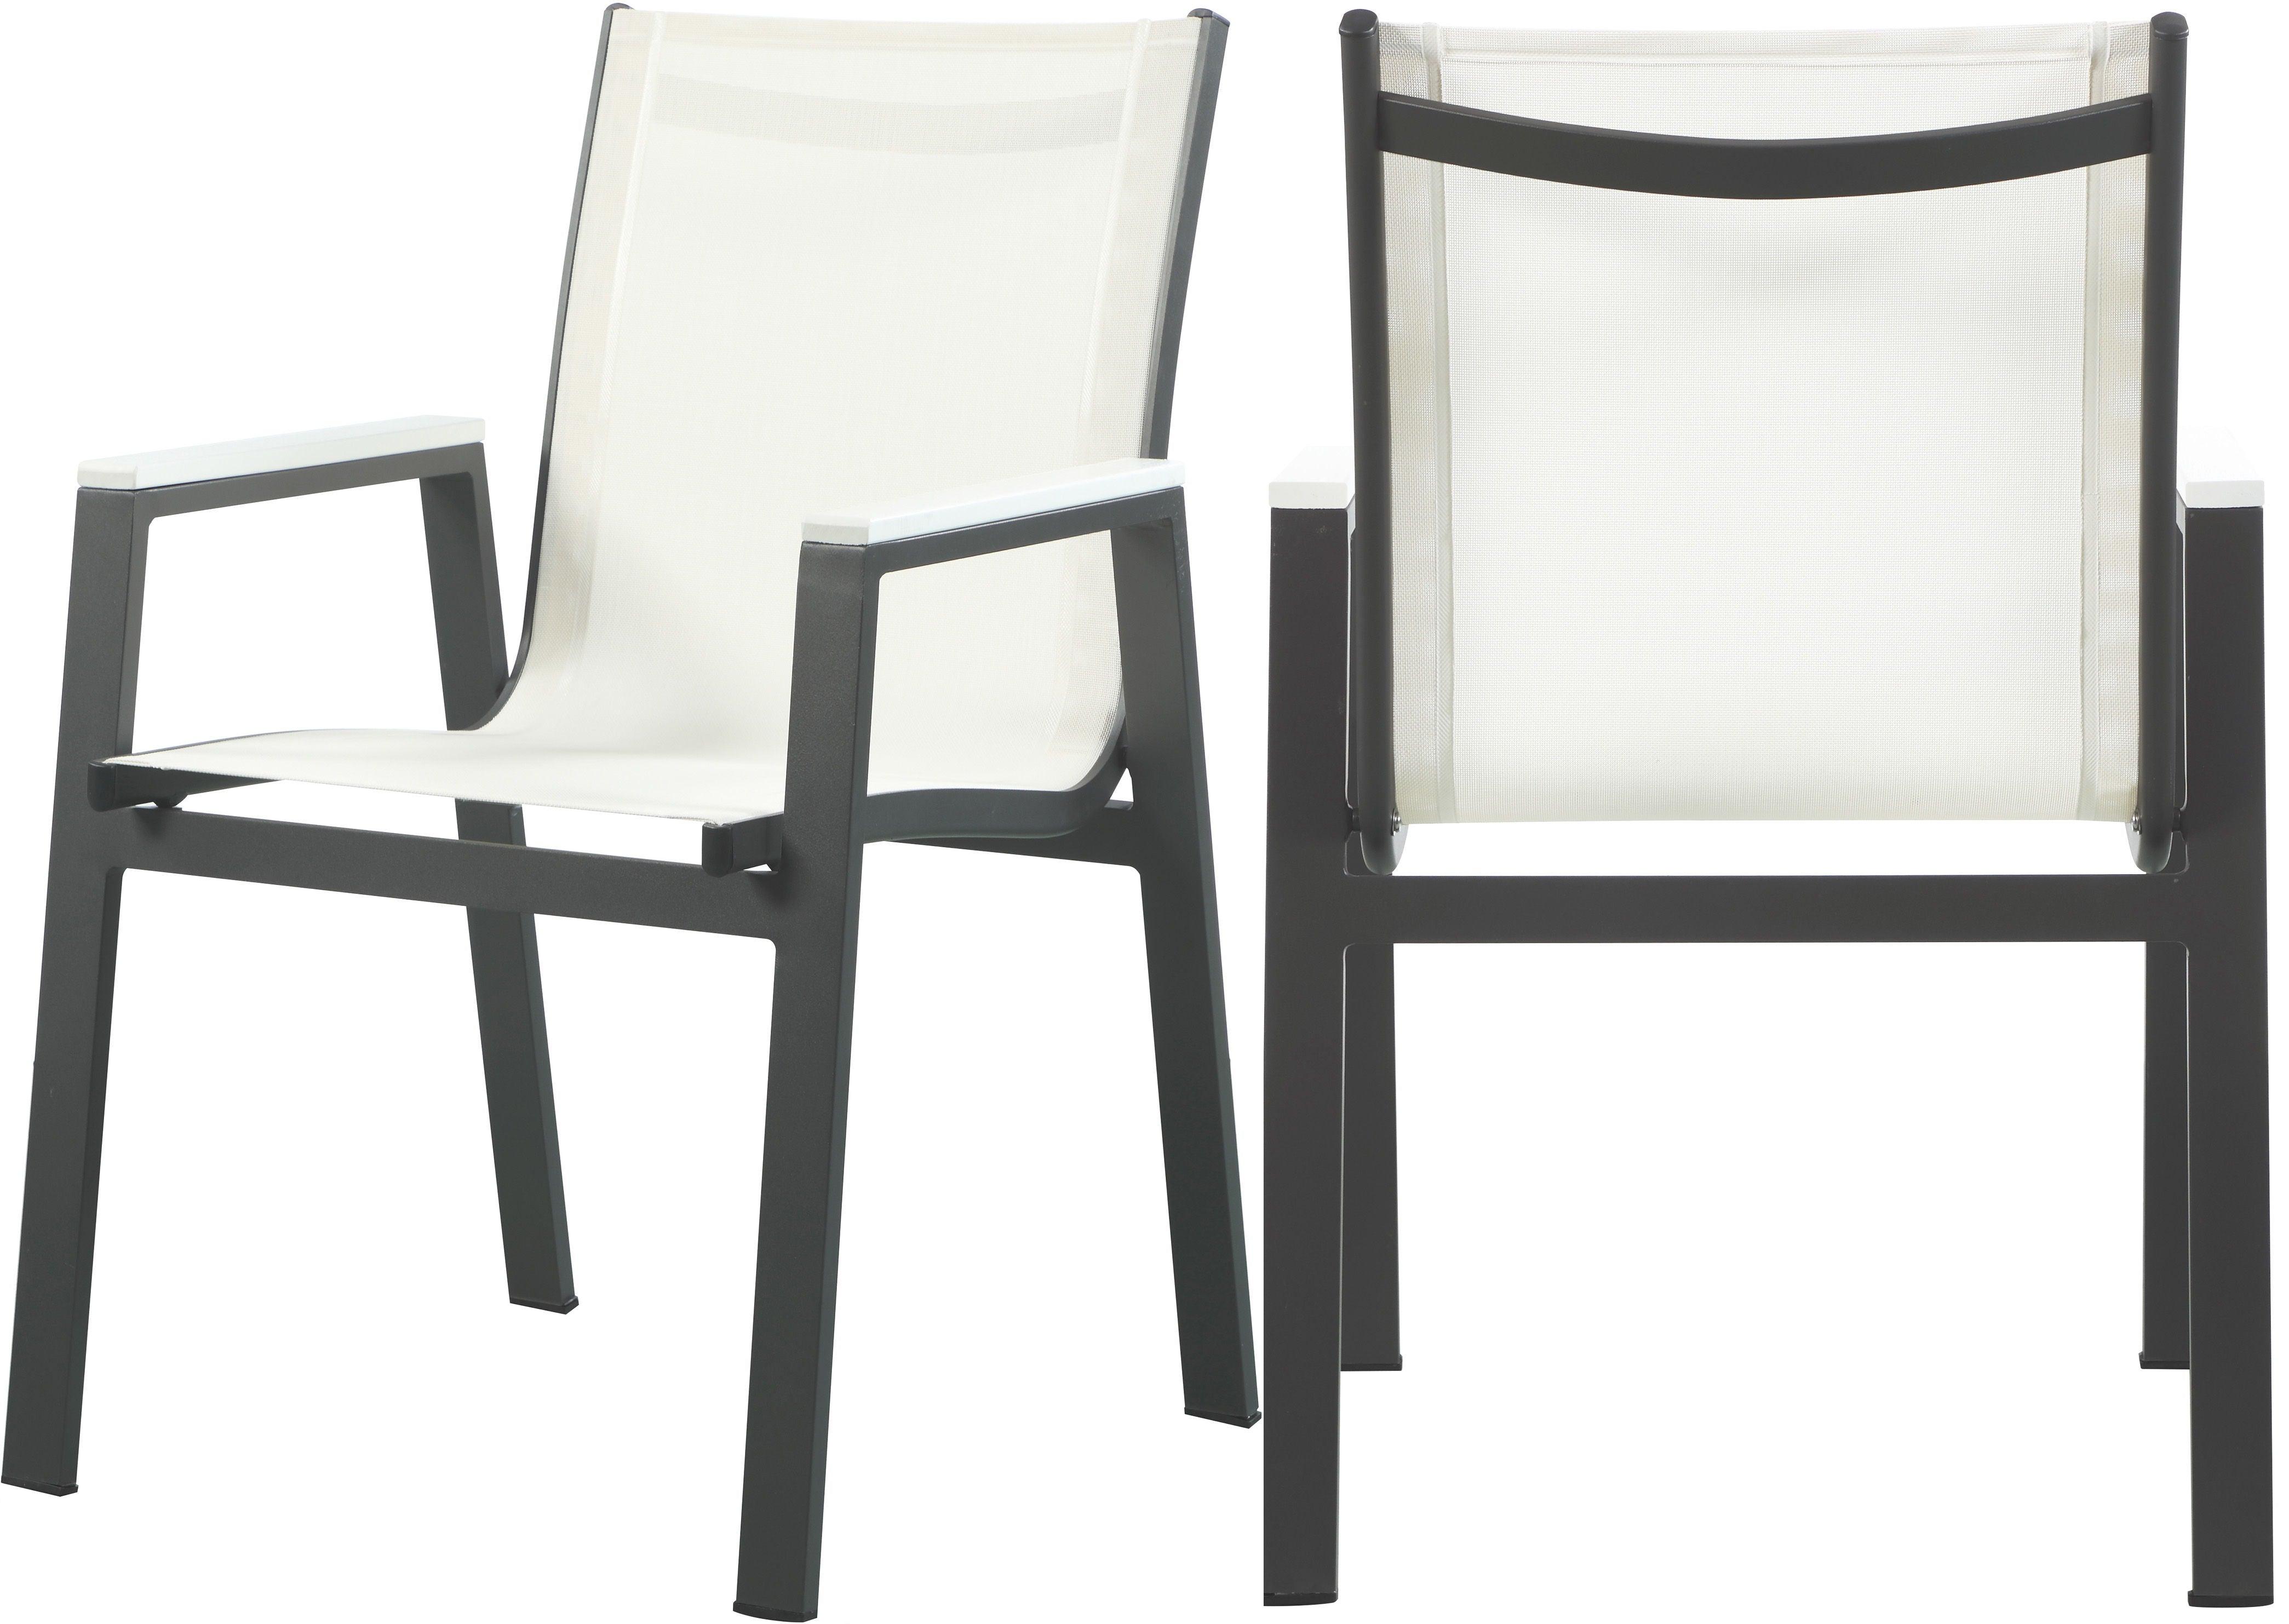 Meridian Furniture - Nizuc - Outdoor Patio Dining Arm Chair (Set of 2) - White - 5th Avenue Furniture